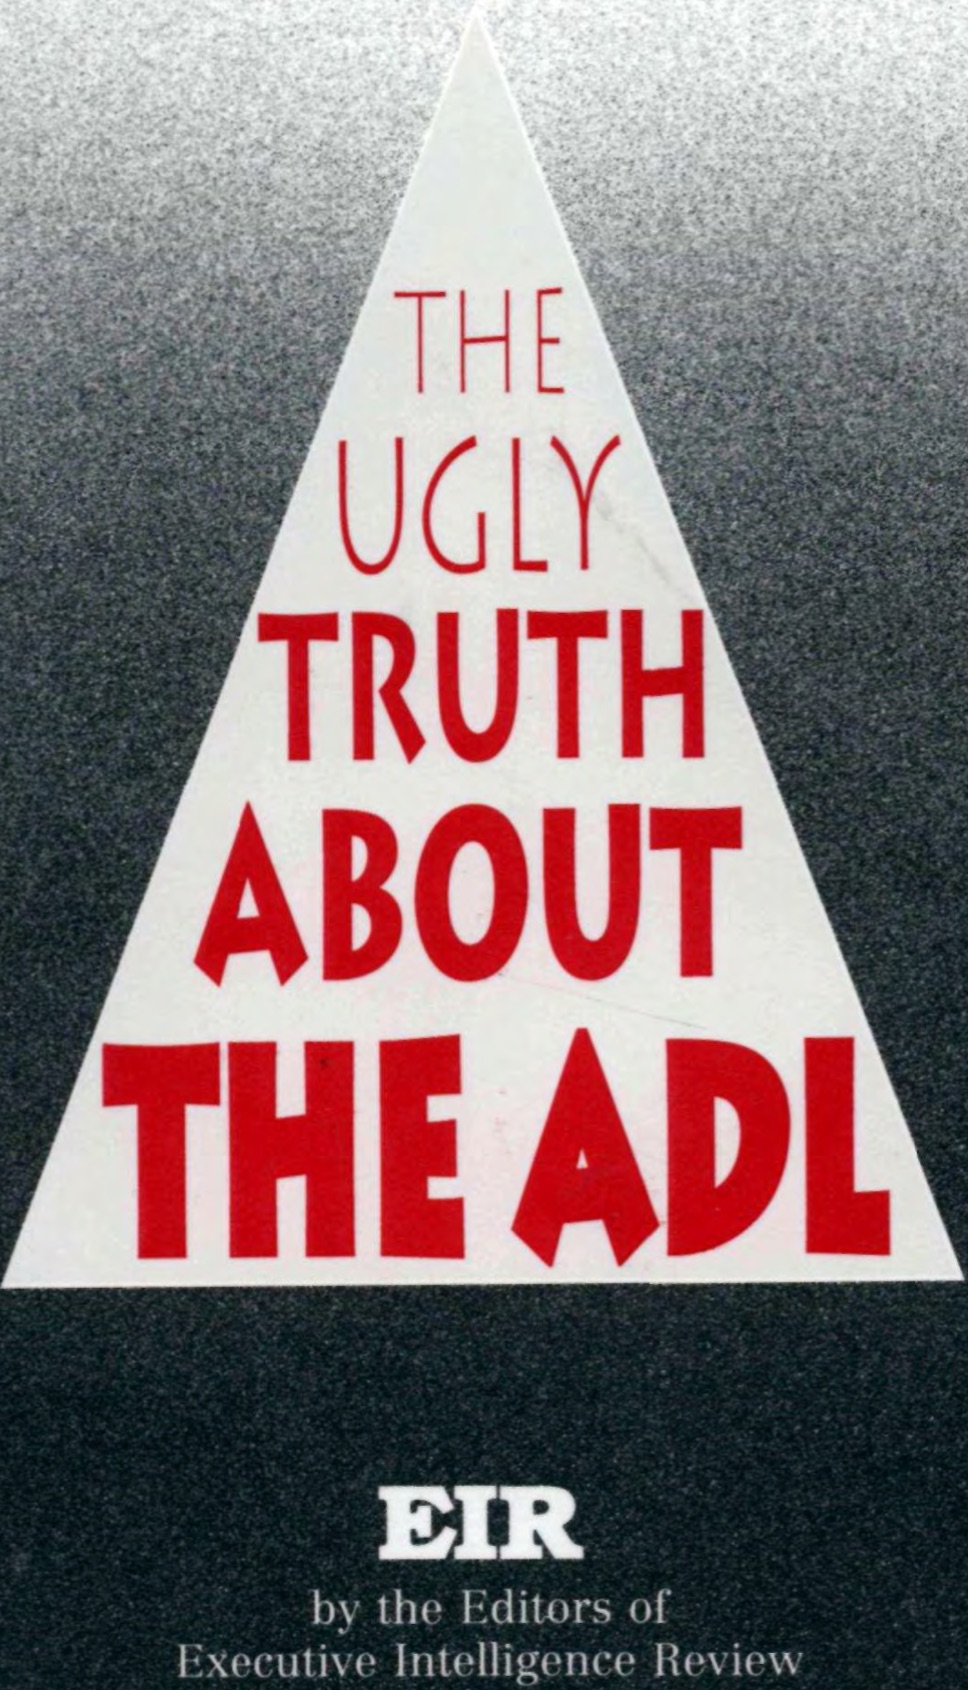 The Ugly Truth About the ADL (1992) by Executive Intelligence Review Editors